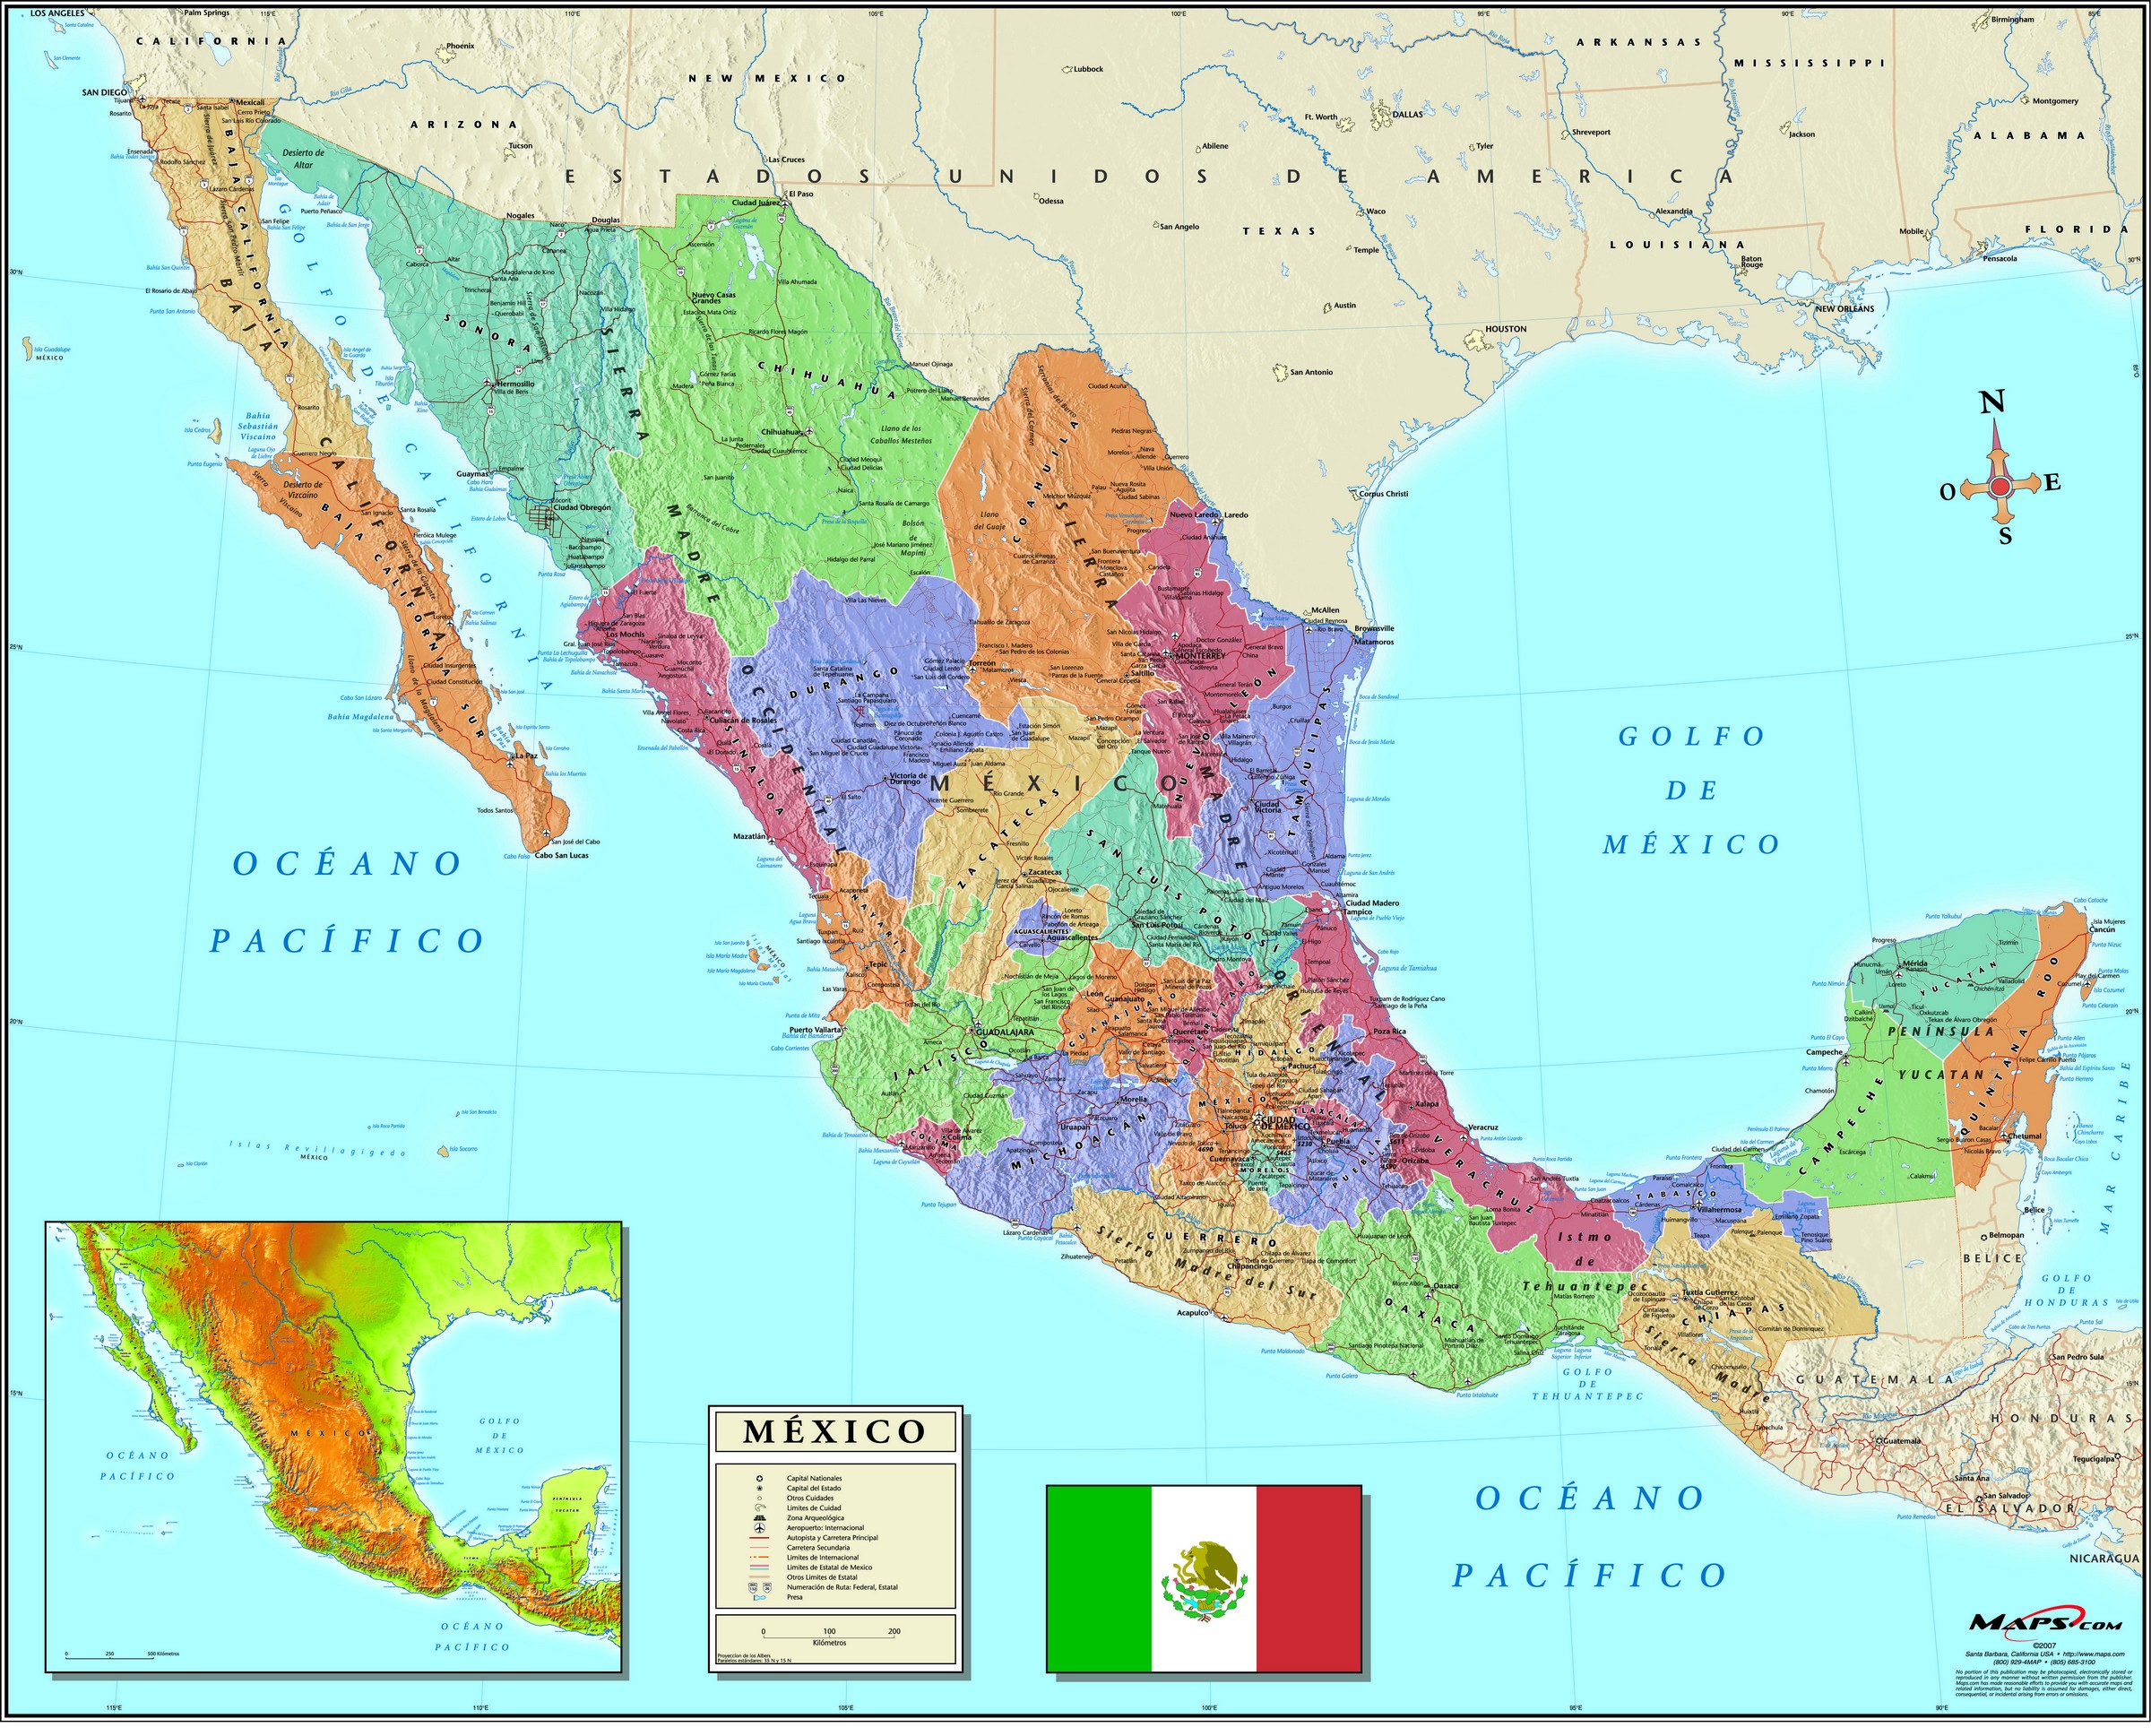 Mexico Wall Map In Spanish - Maps.com